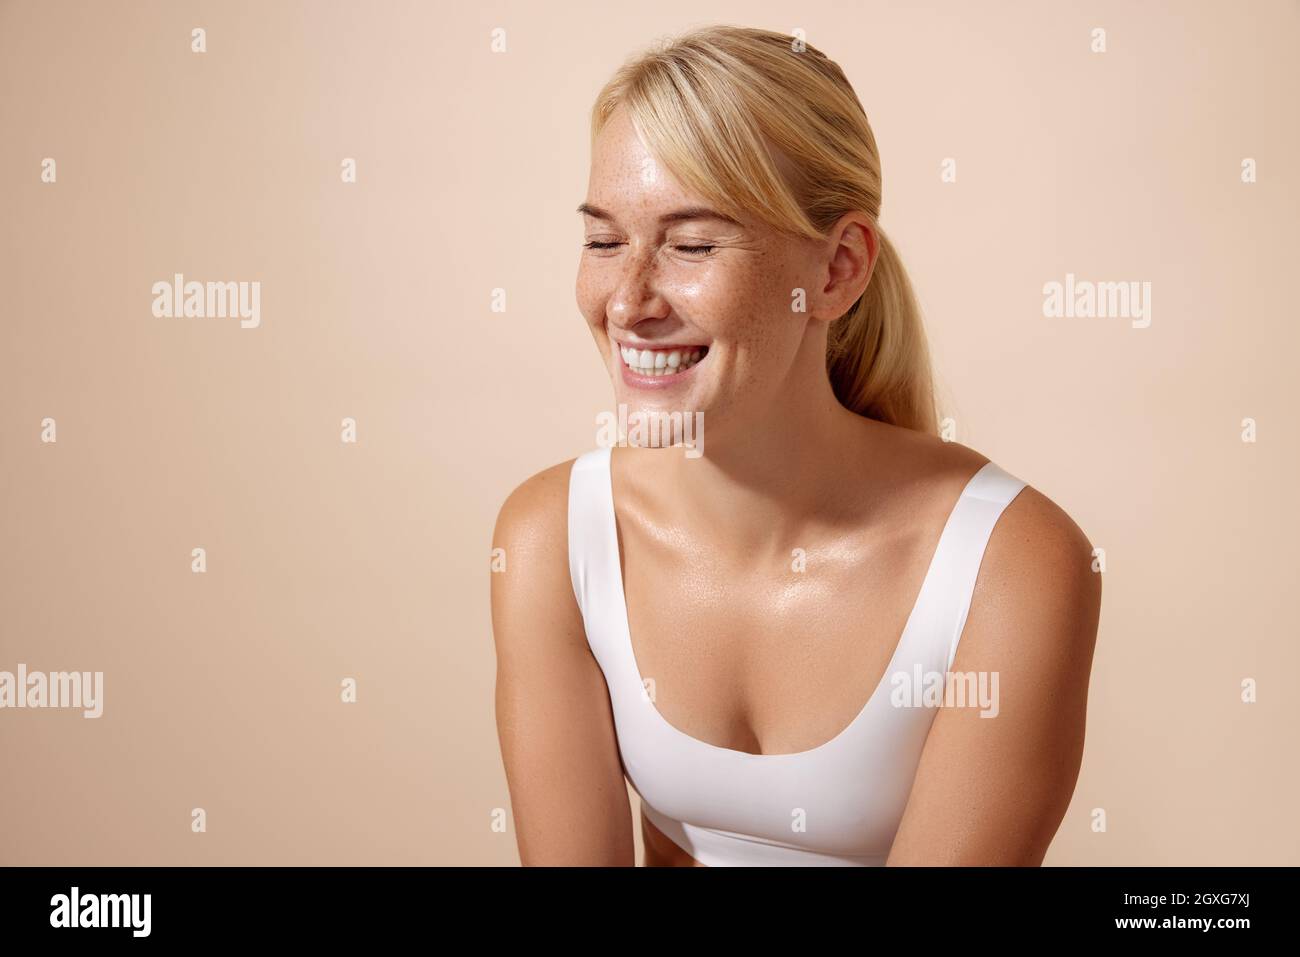 Portrait of a laughing woman with perfect skin and freckles against pastel background Stock Photo